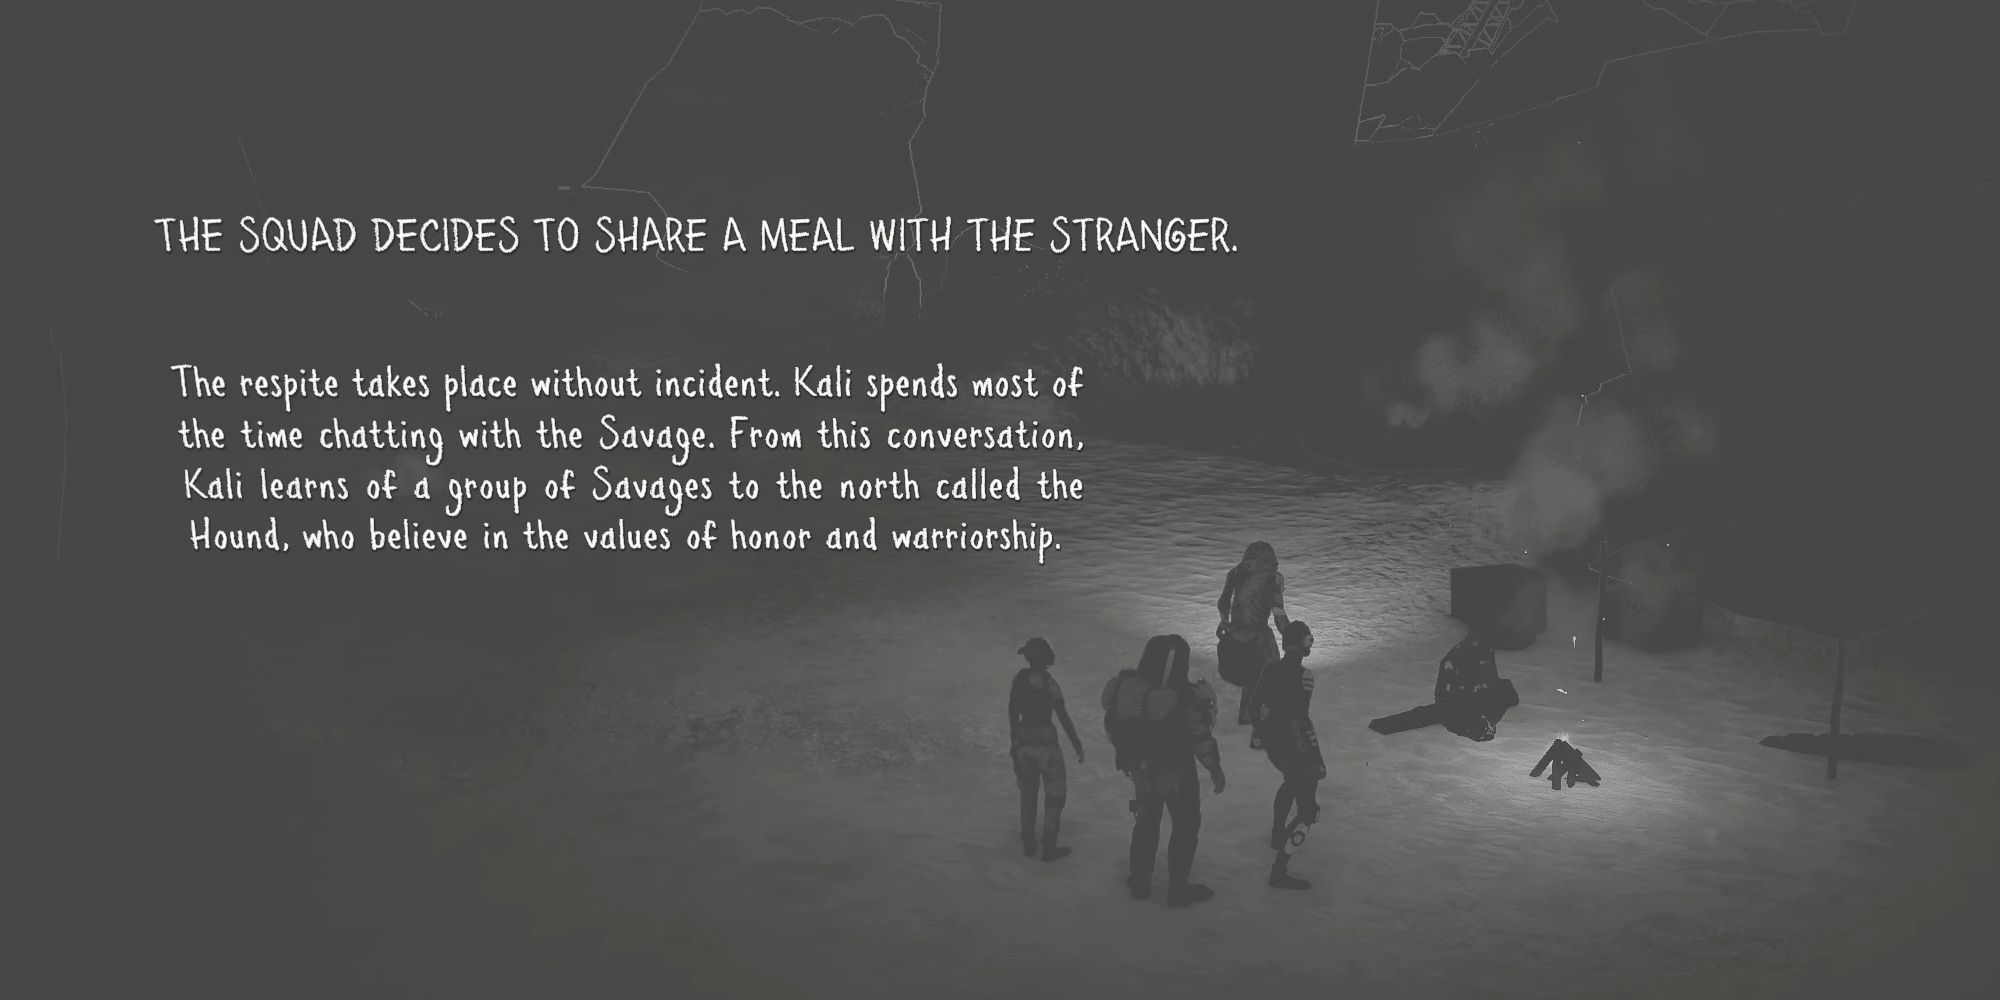 text explaining that the survivors are going to share a meal with the stranger